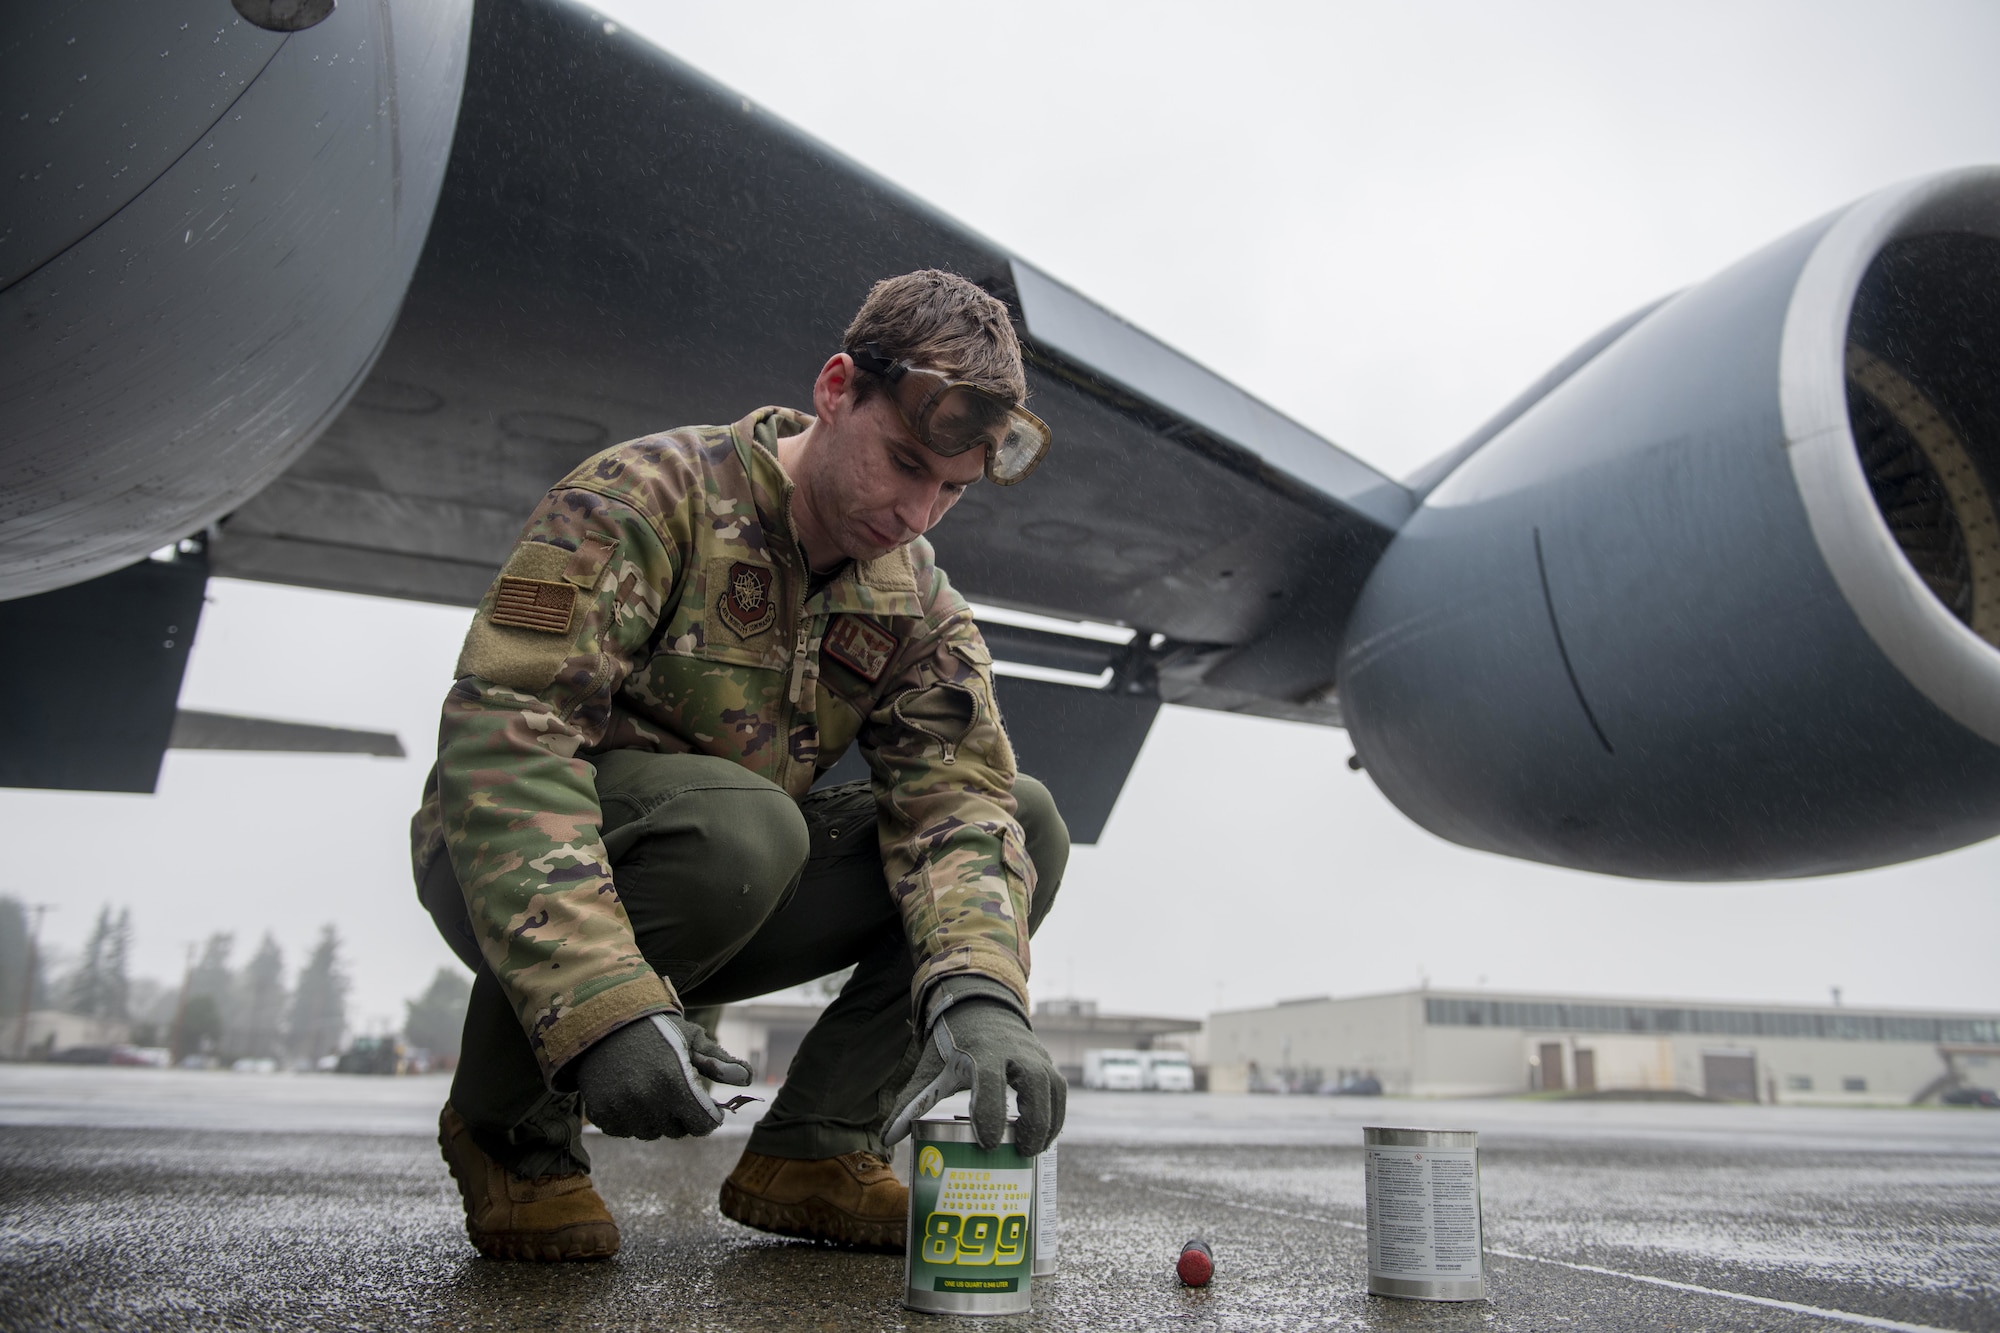 U.S. Air Force Capt. Colin Strickland, 92nd Air Refueling Squadron KC-135 Stratotanker pilot, prepares to service a KC-135 during a large-scale readiness exercise at Joint Base Lewis-McChord, Washington, Dec. 7, 2021. Multiple crews from Fairchild Air Force Base flew to various locations to train and exercise multi-capable Airmen concepts, such as aircrew Airmen performing routine maintenance tasks on the KC-135. (U.S. Air Force photo by Staff Sgt. Lawrence Sena)